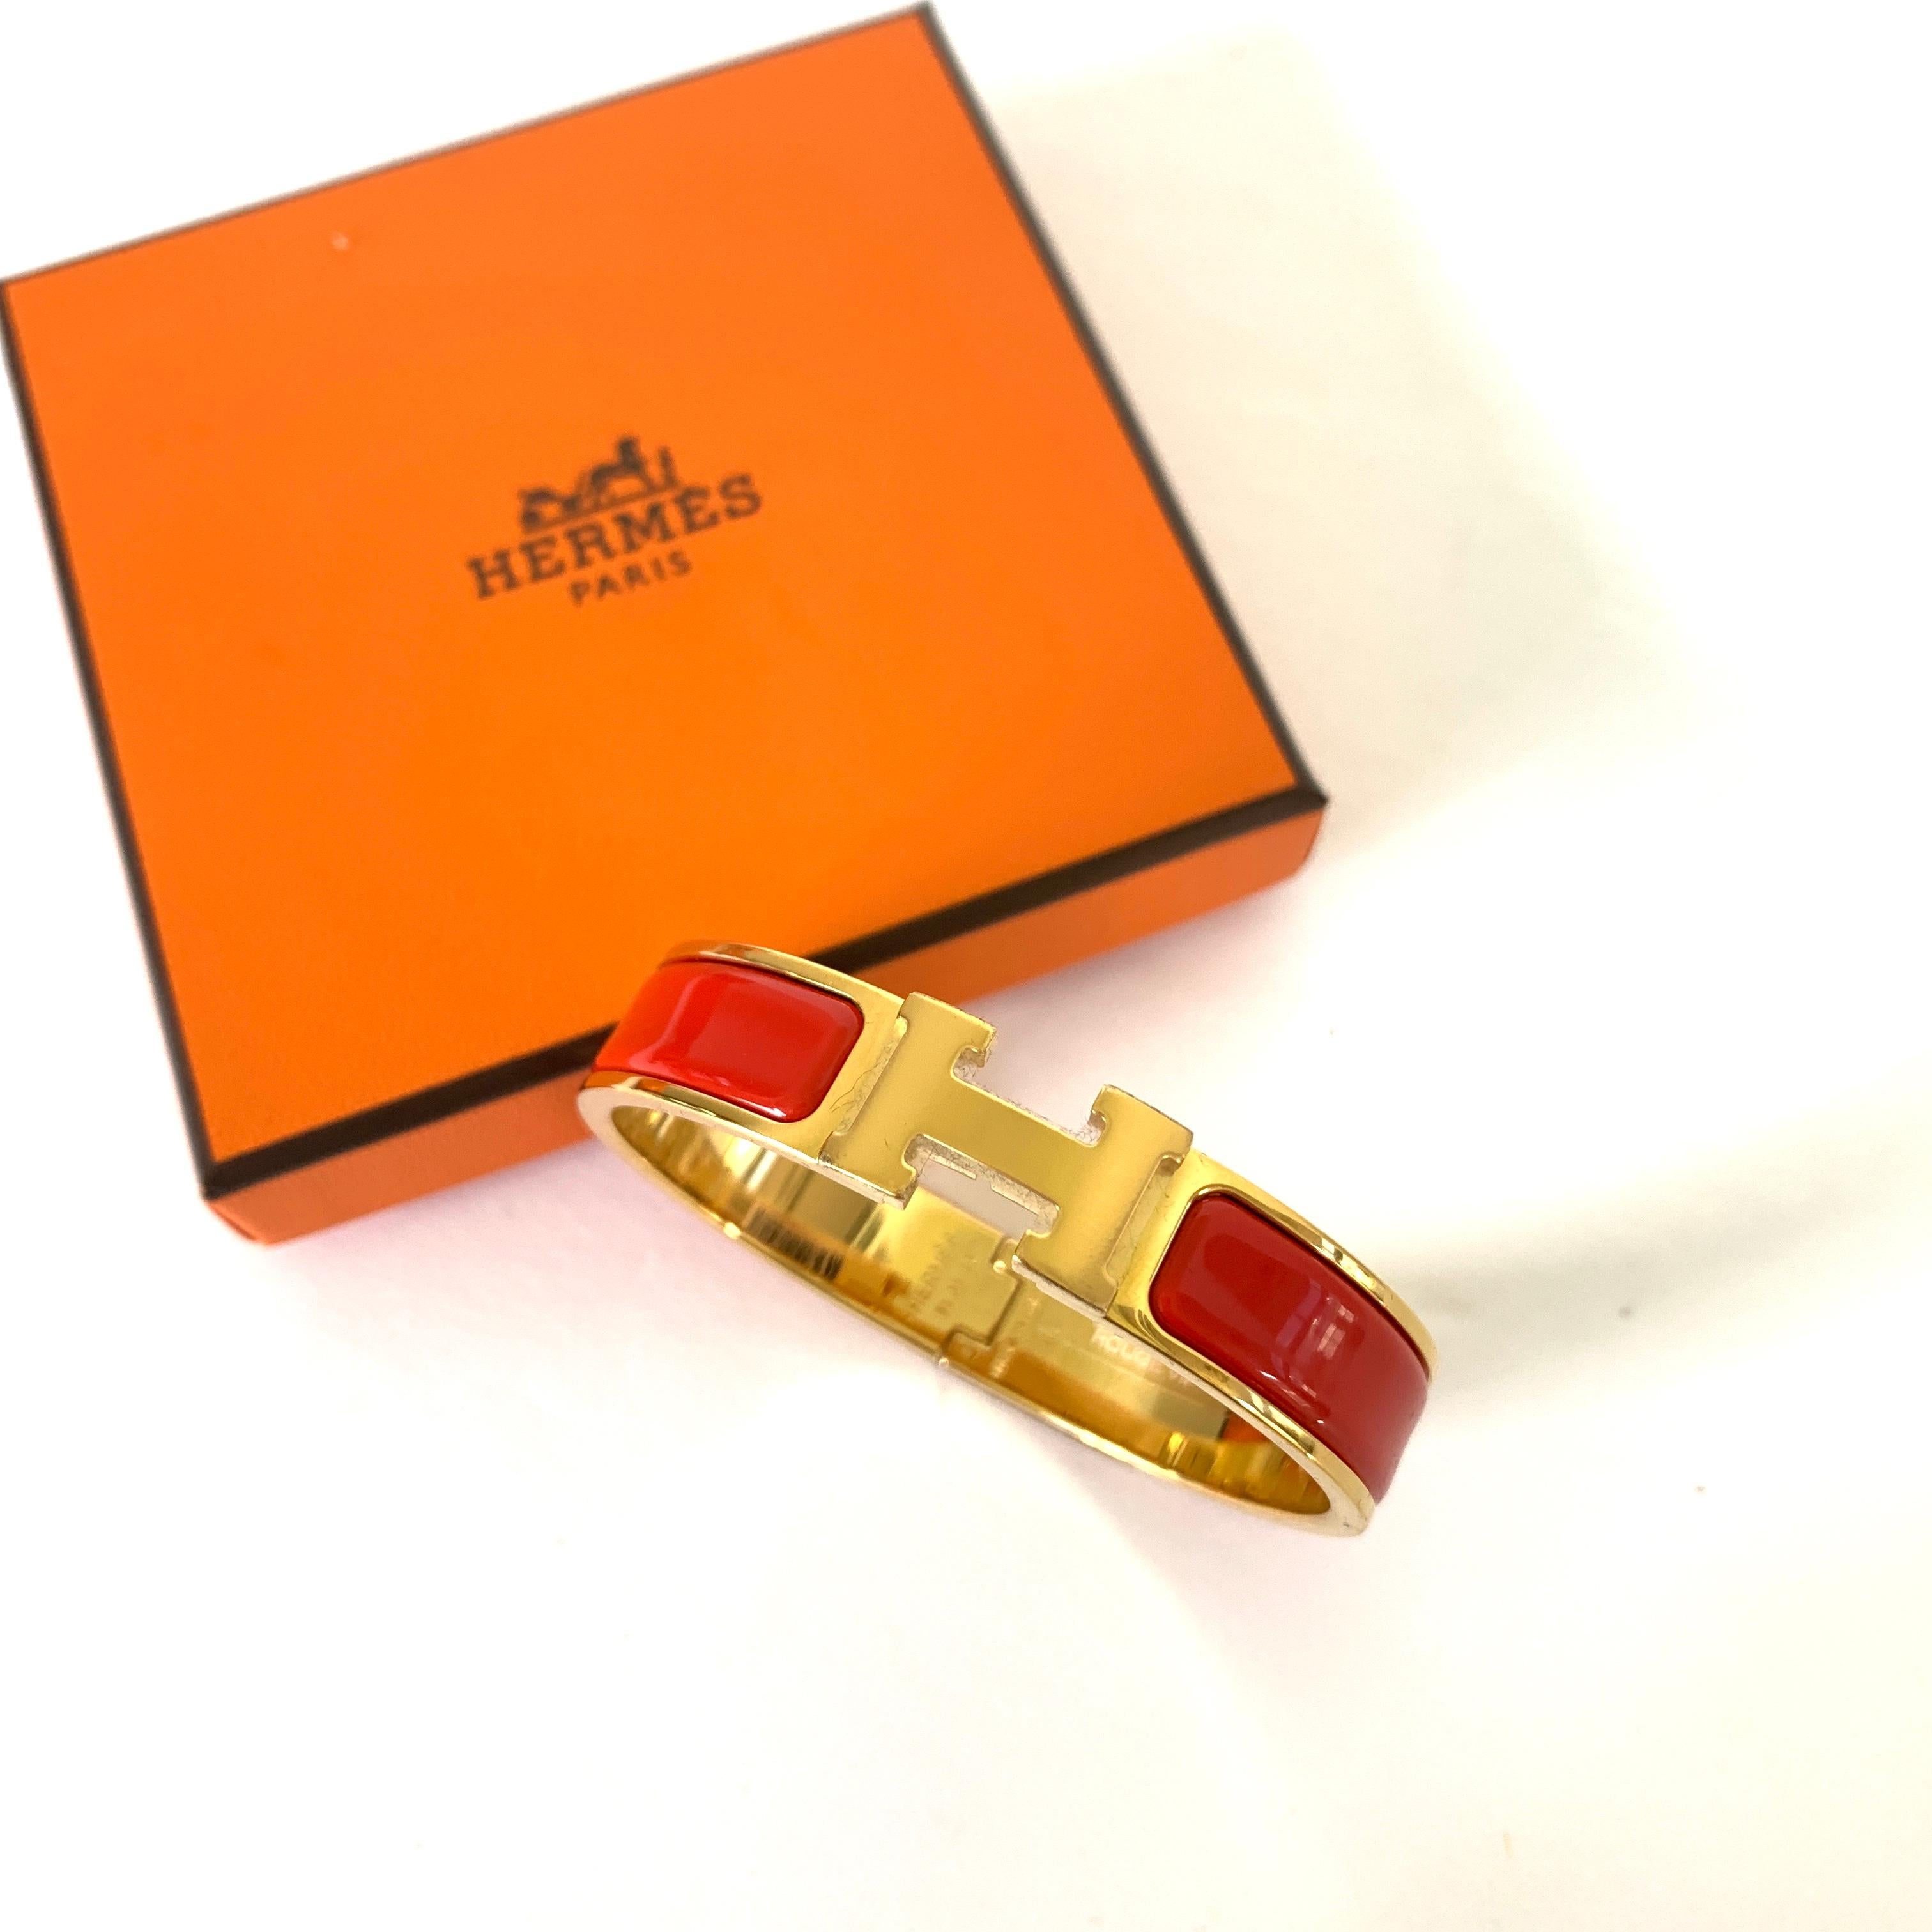 Hermes Clic  H bracelet in  Gold Plated 
Color: Rouge Vif, Red
Circumference: 7